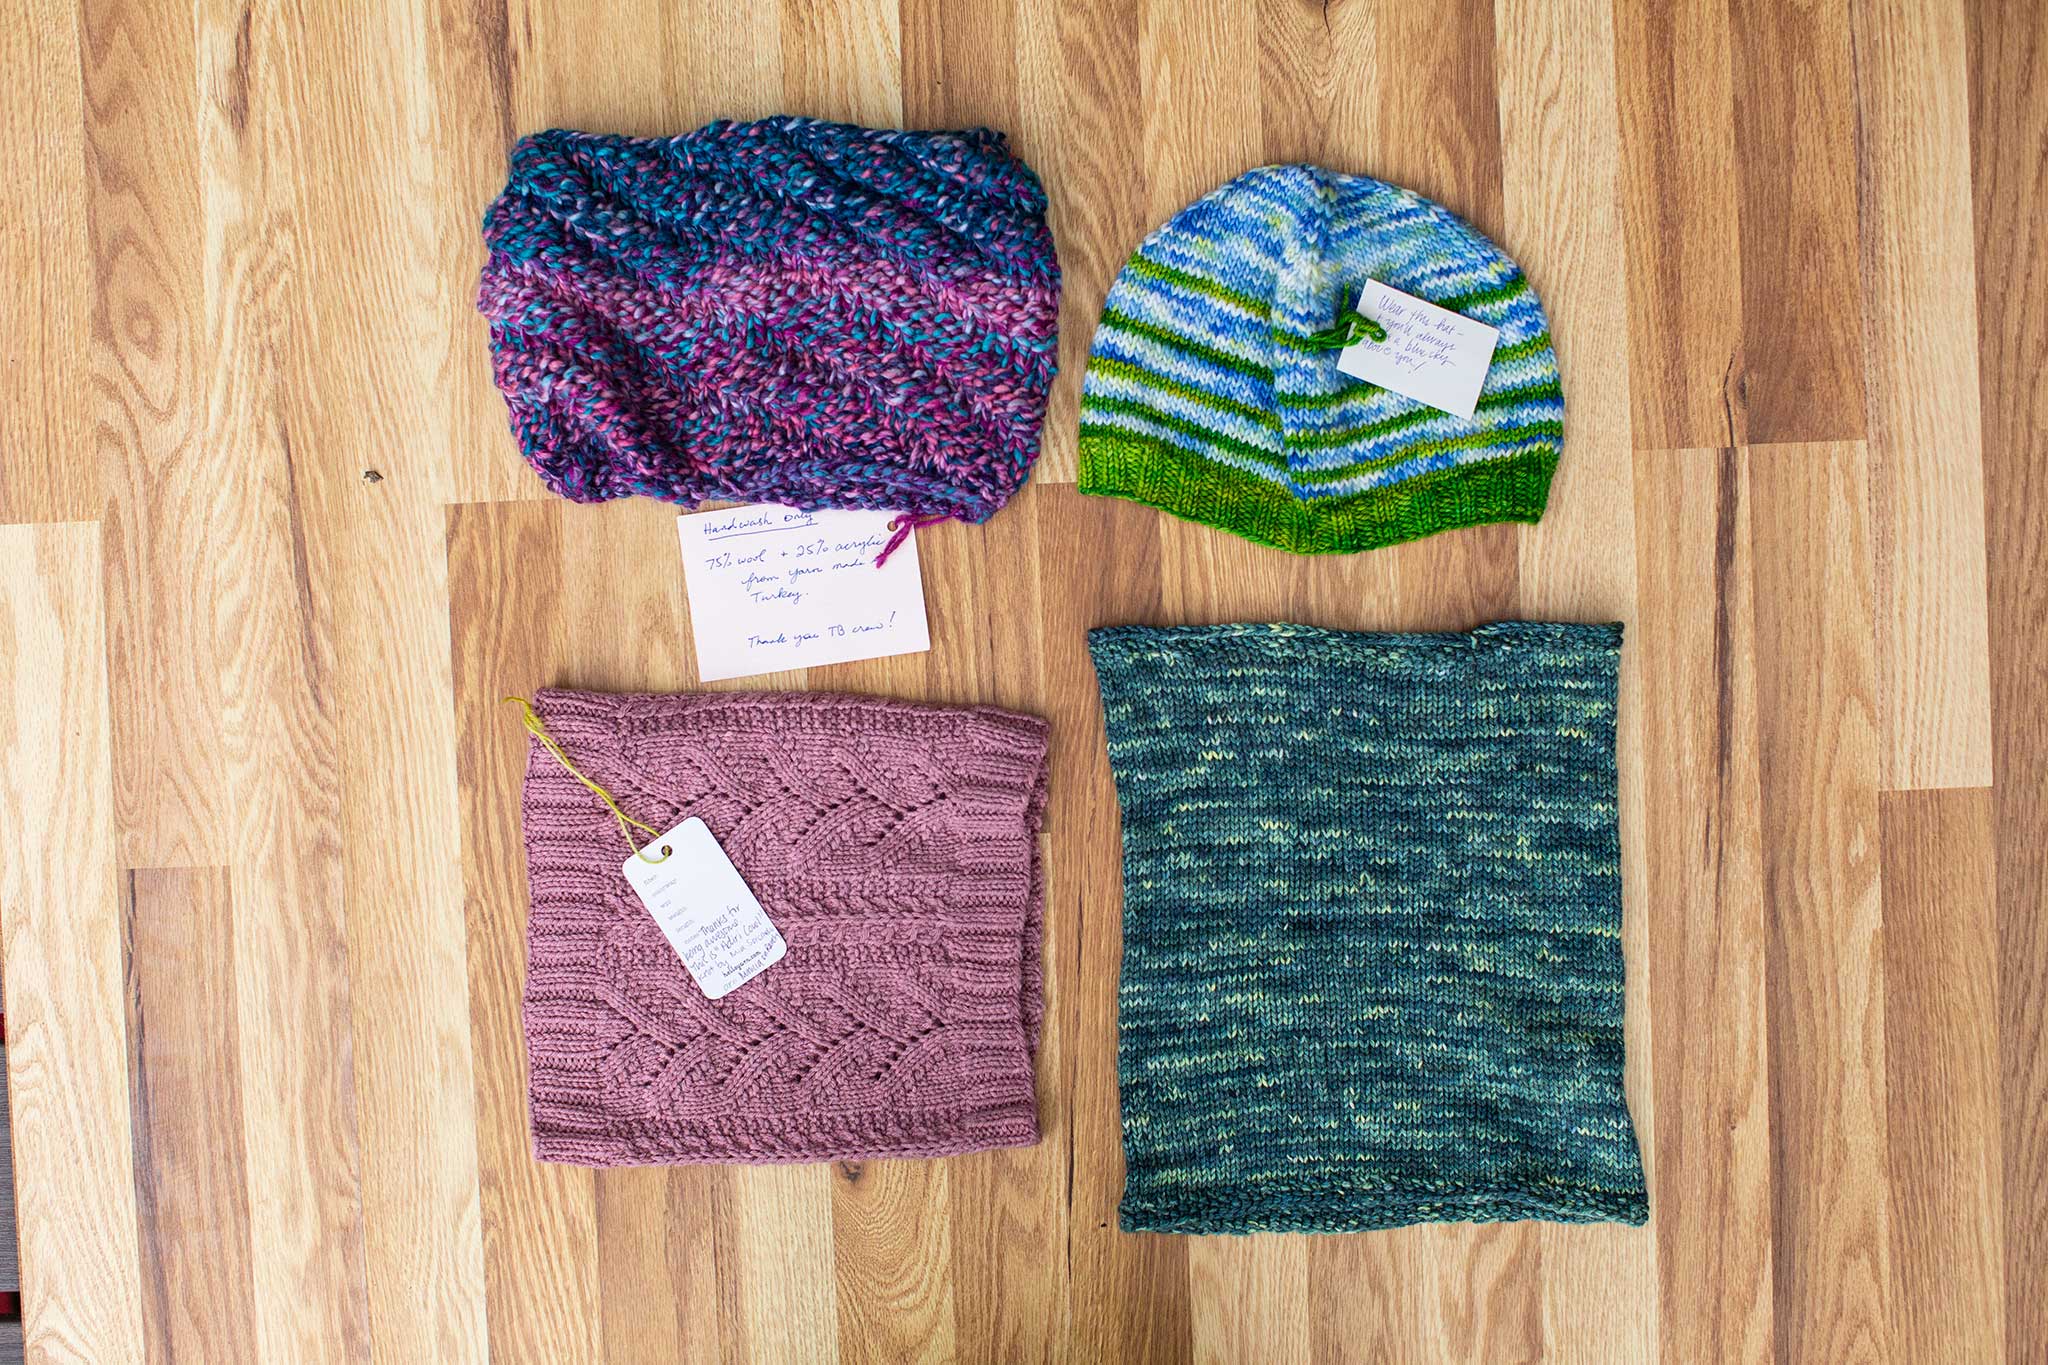 Clockwise: a blue and green hat, a green and blue cowl, a pink and red cowl, and a blue/purple/red cowl.